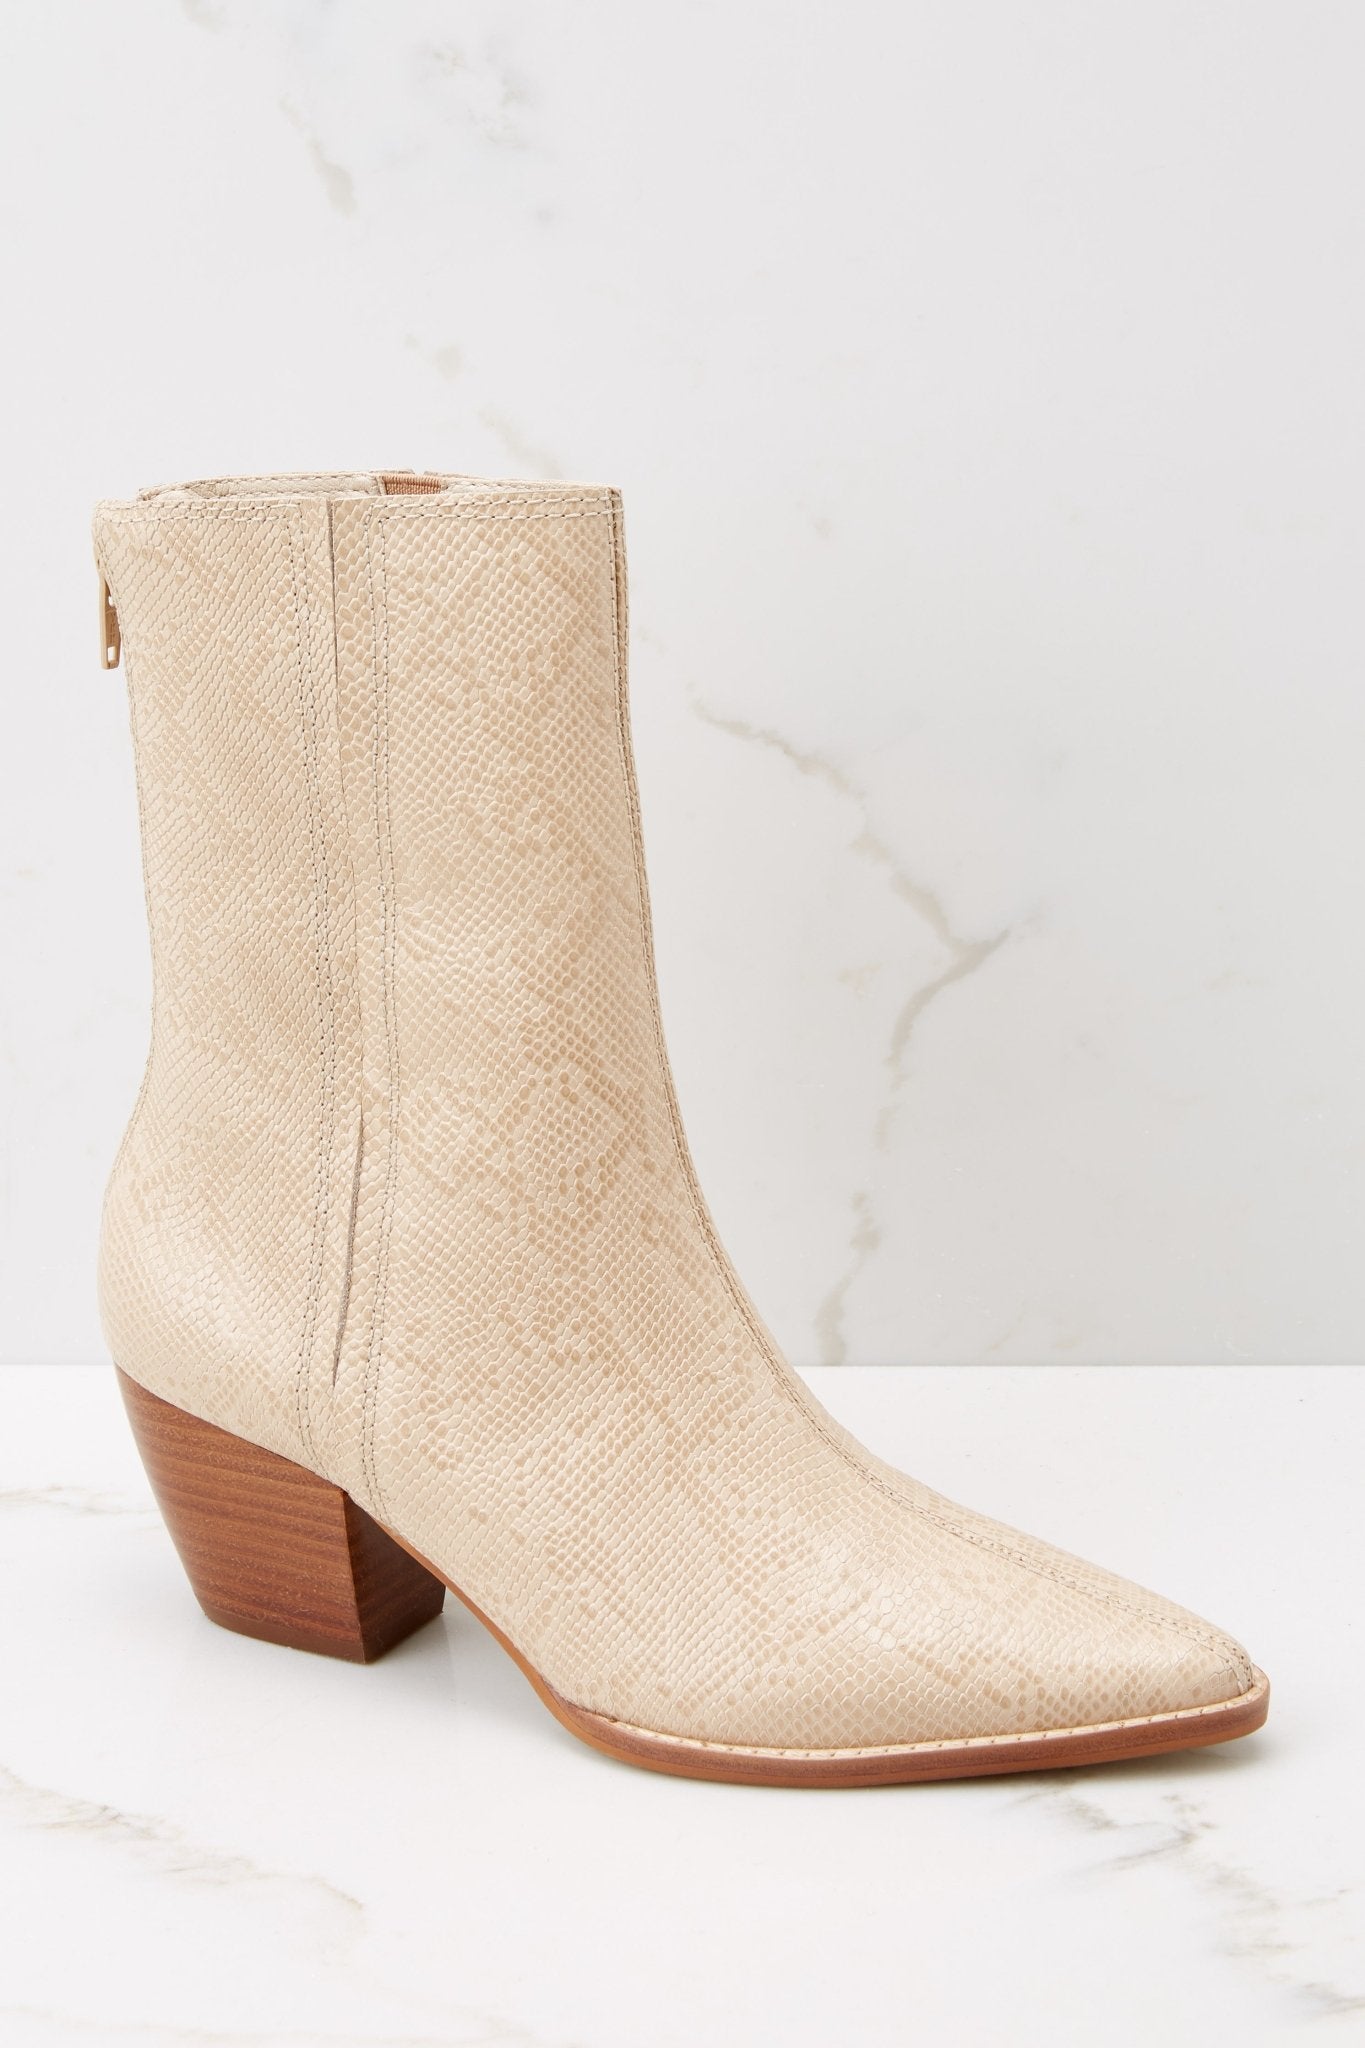 Matisse Annabelle Boot in Natural Snake | Red Dress